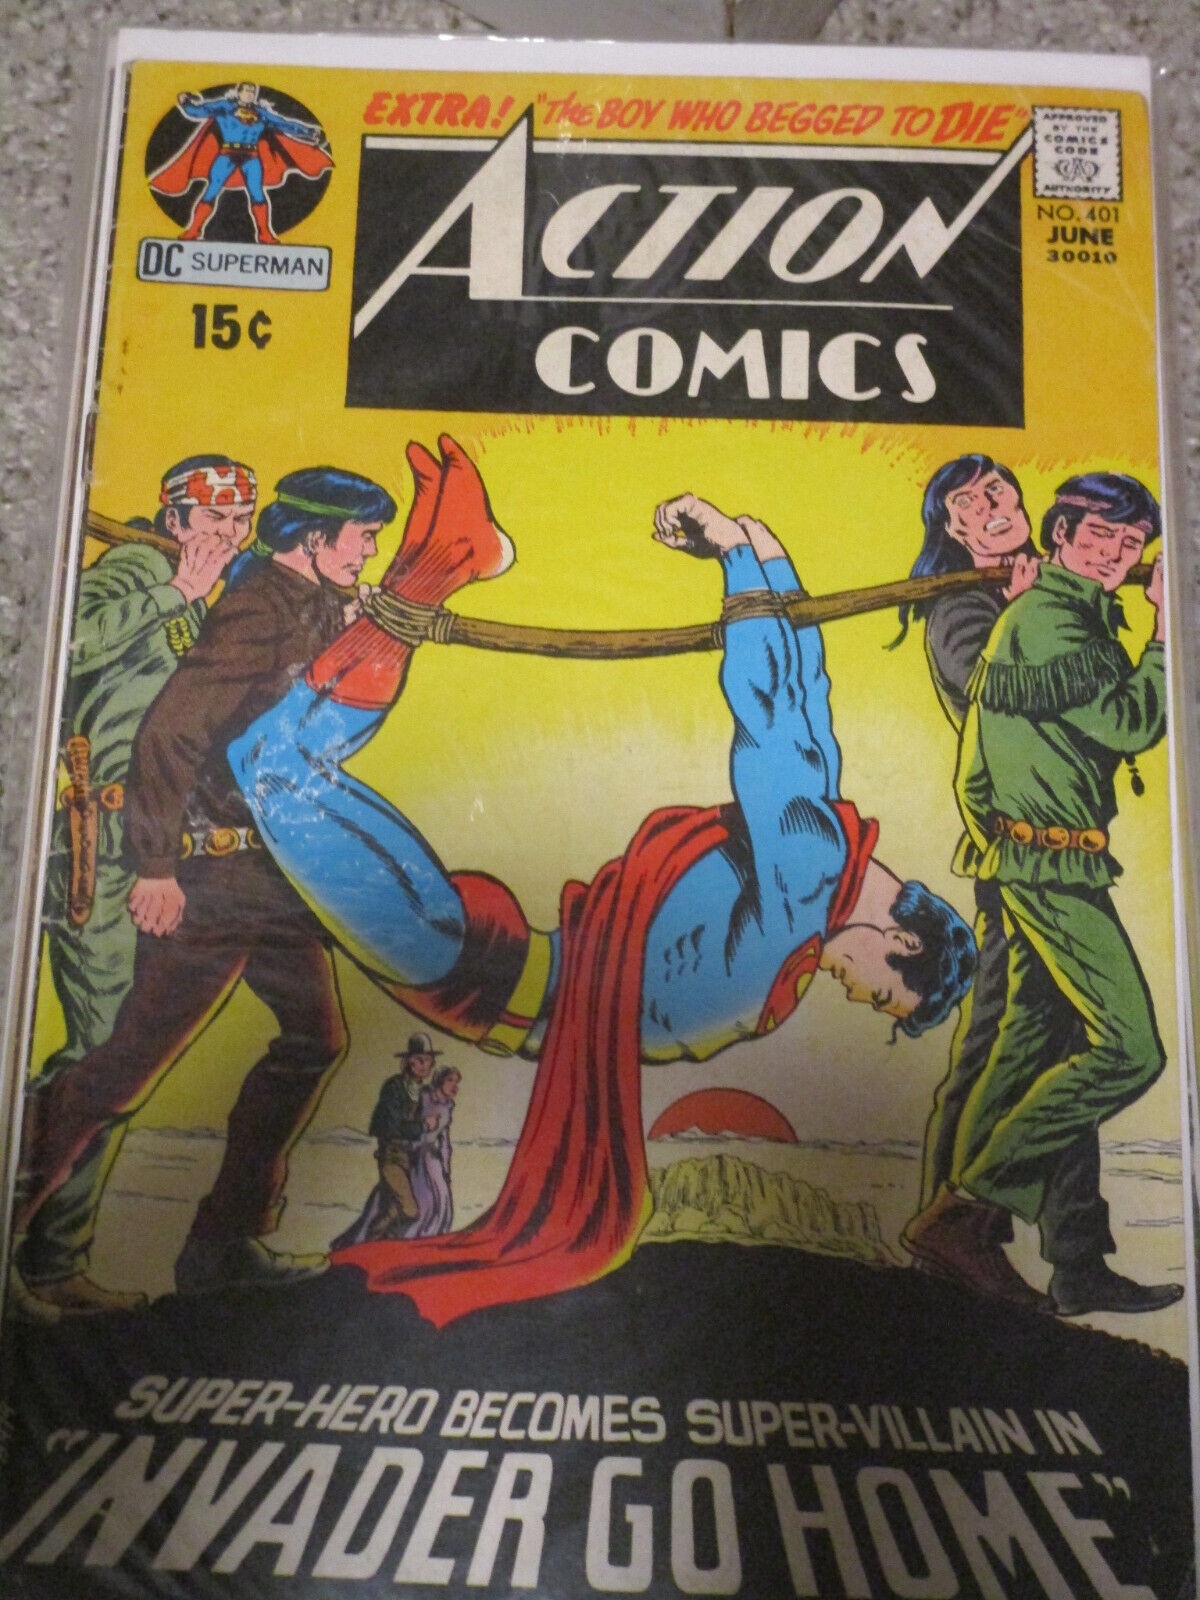 Action Comics pick an issue